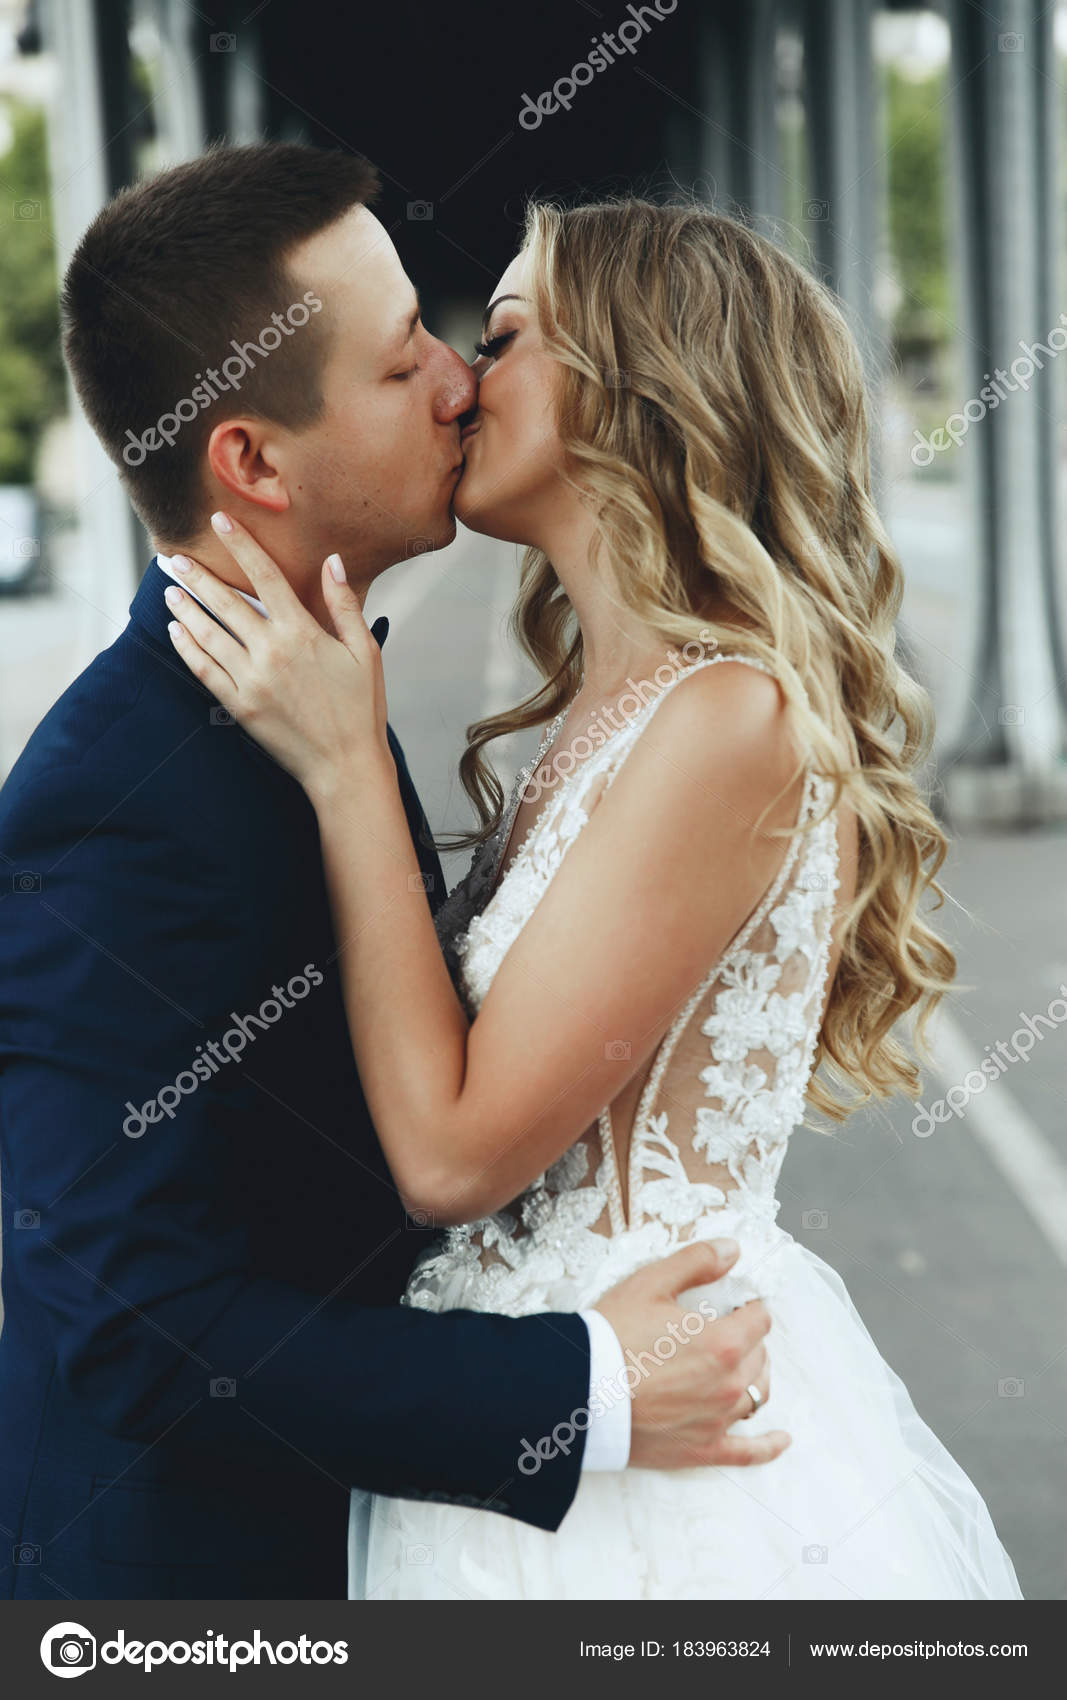 Groom Drops Bride During a 'Dip Kiss' & It's Actually Sweet | CafeMom.com